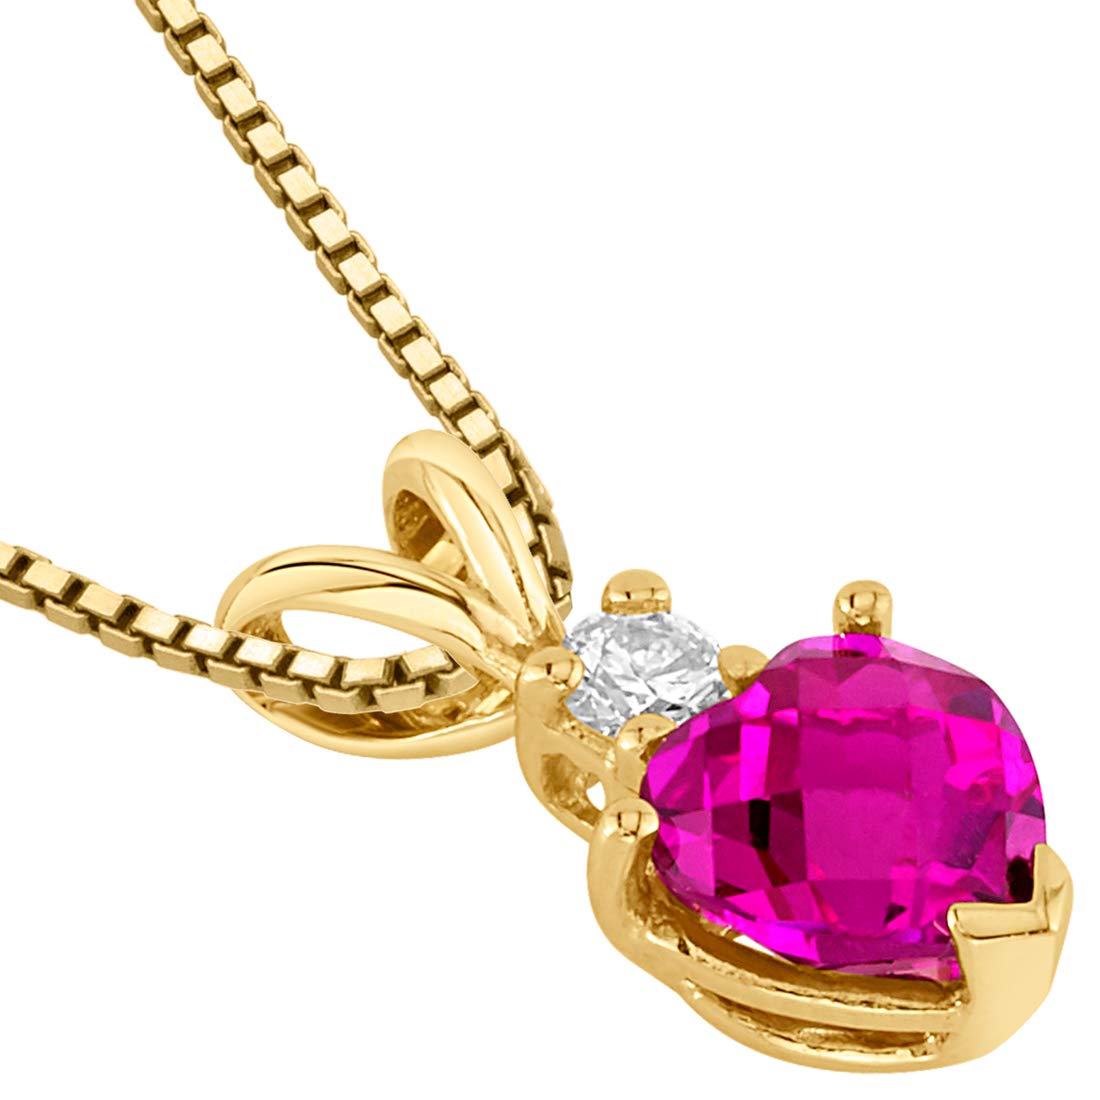 Peora Created Ruby with Genuine Diamond Pendant in 14 Karat Yellow Gold, Heart Shape Solitaire, 6mm, 1 Carat total